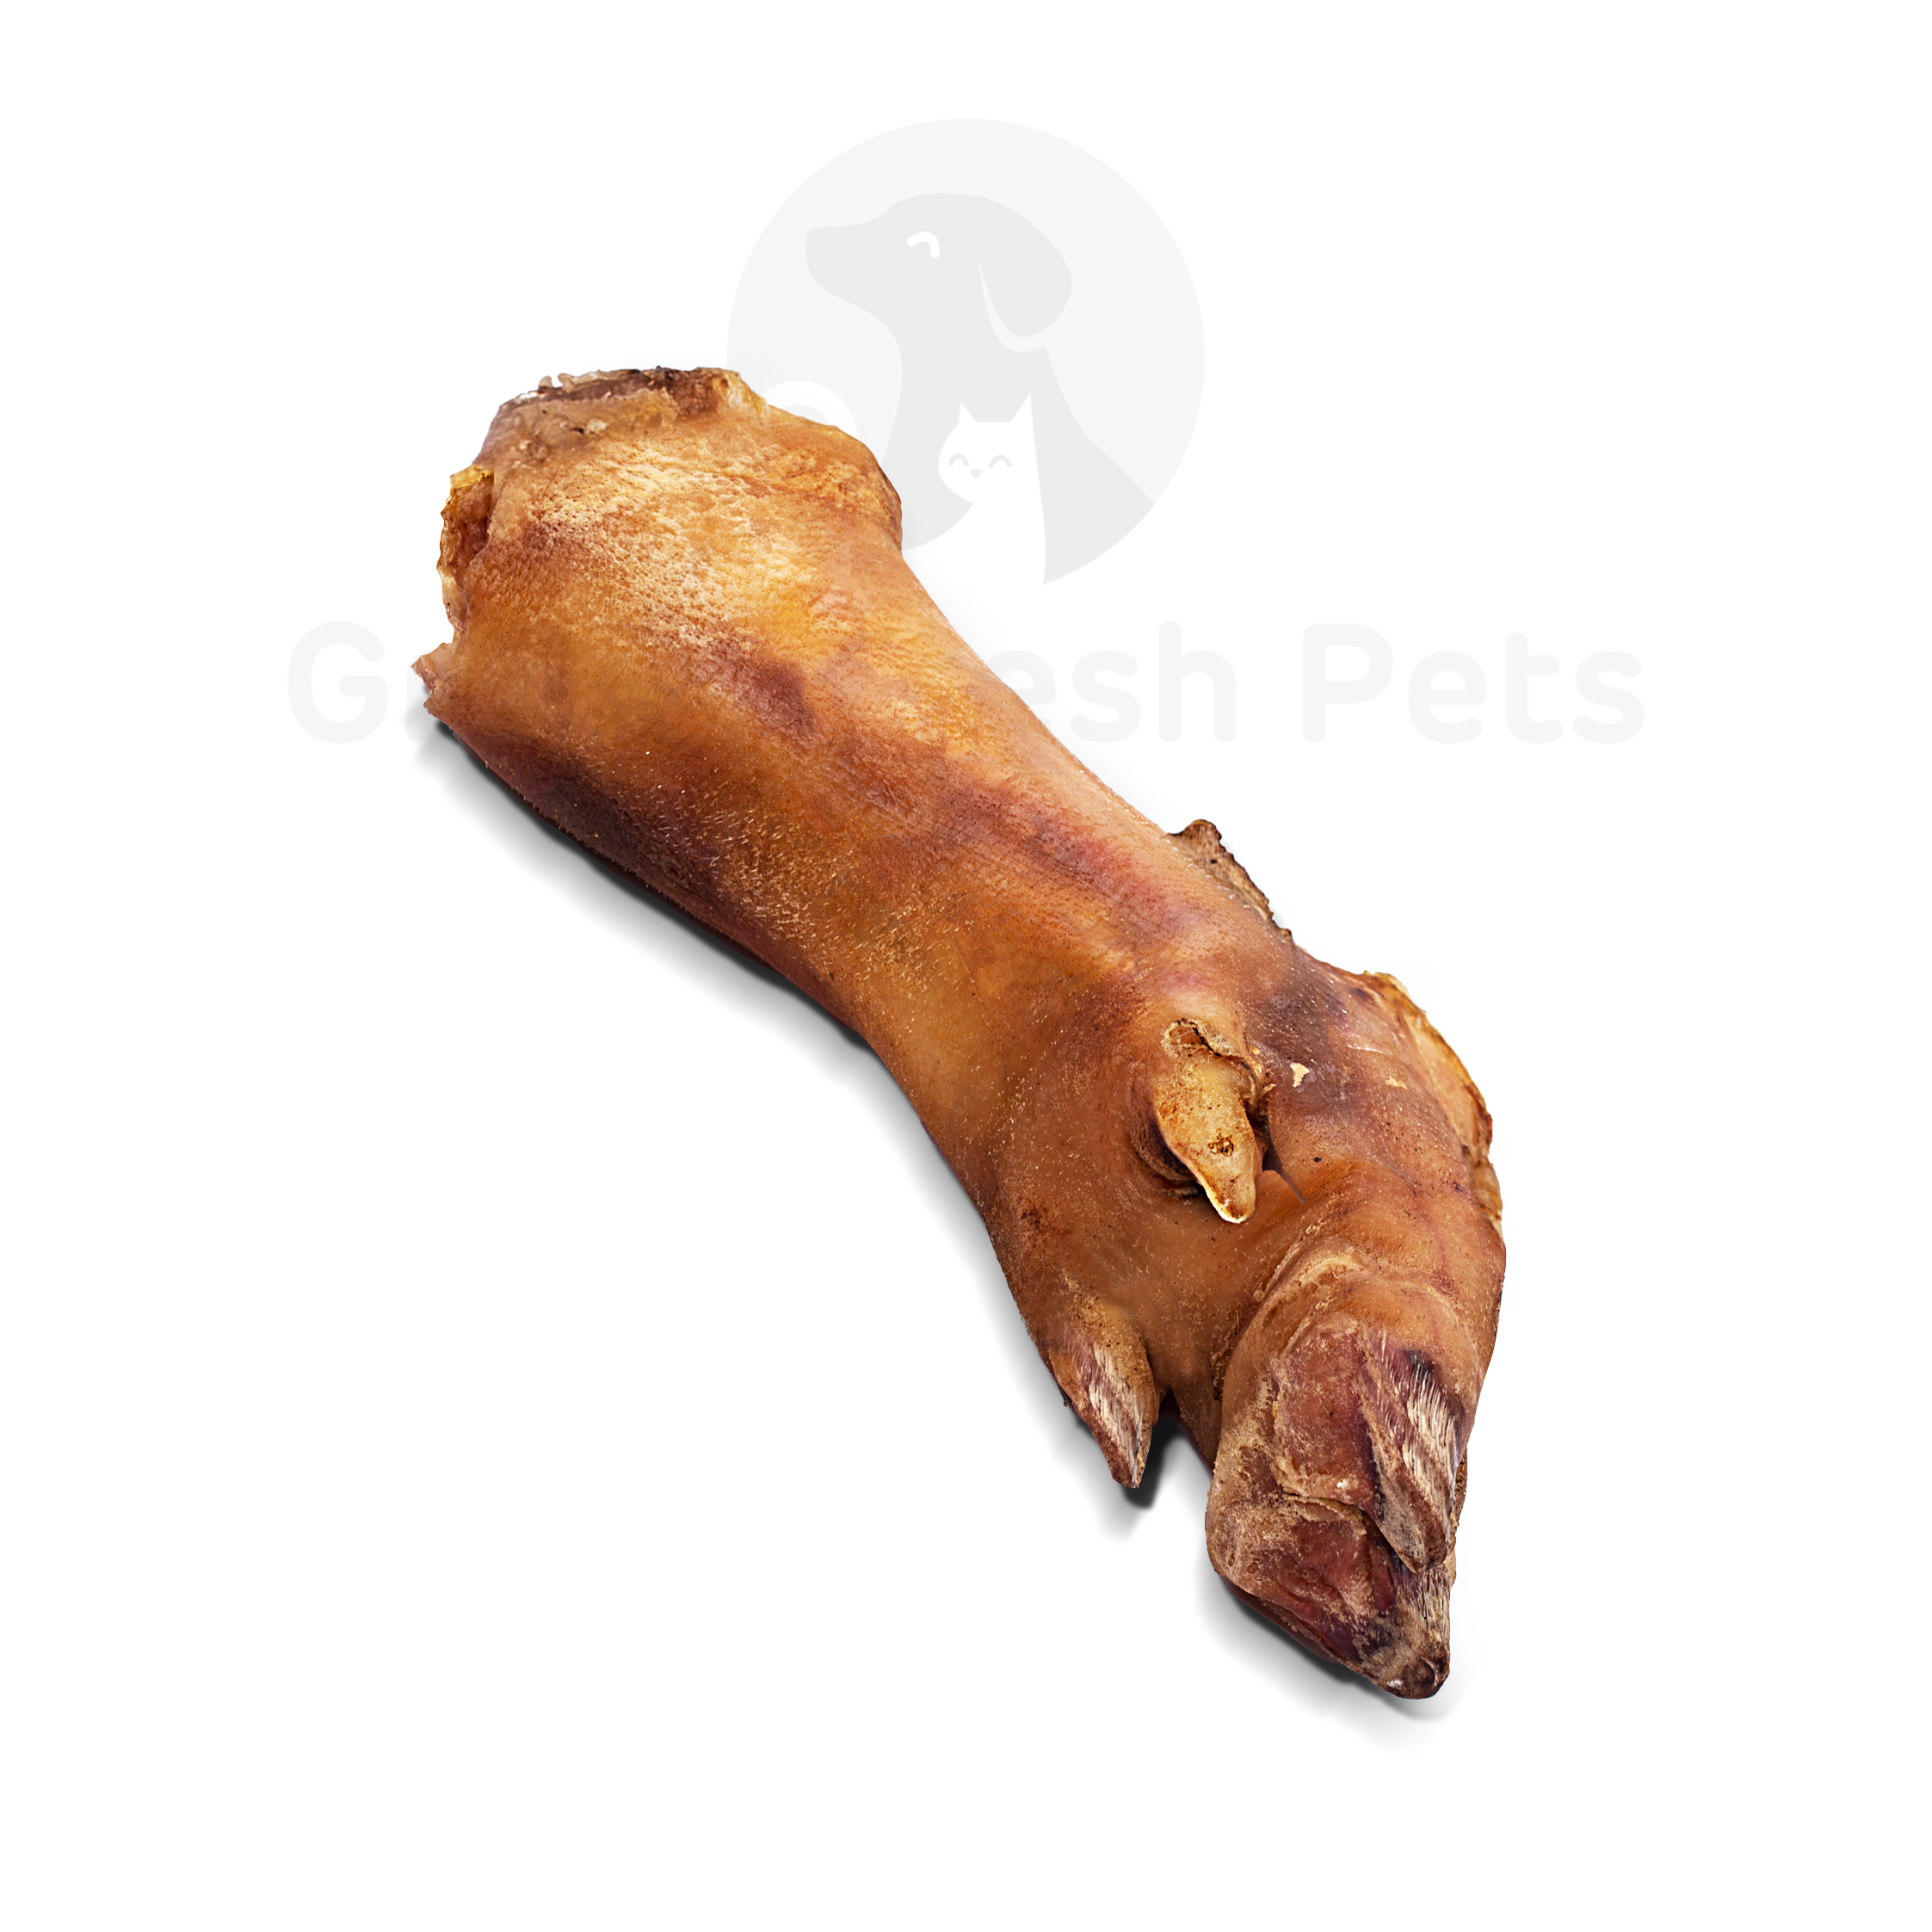 Pig Trotter bone picture